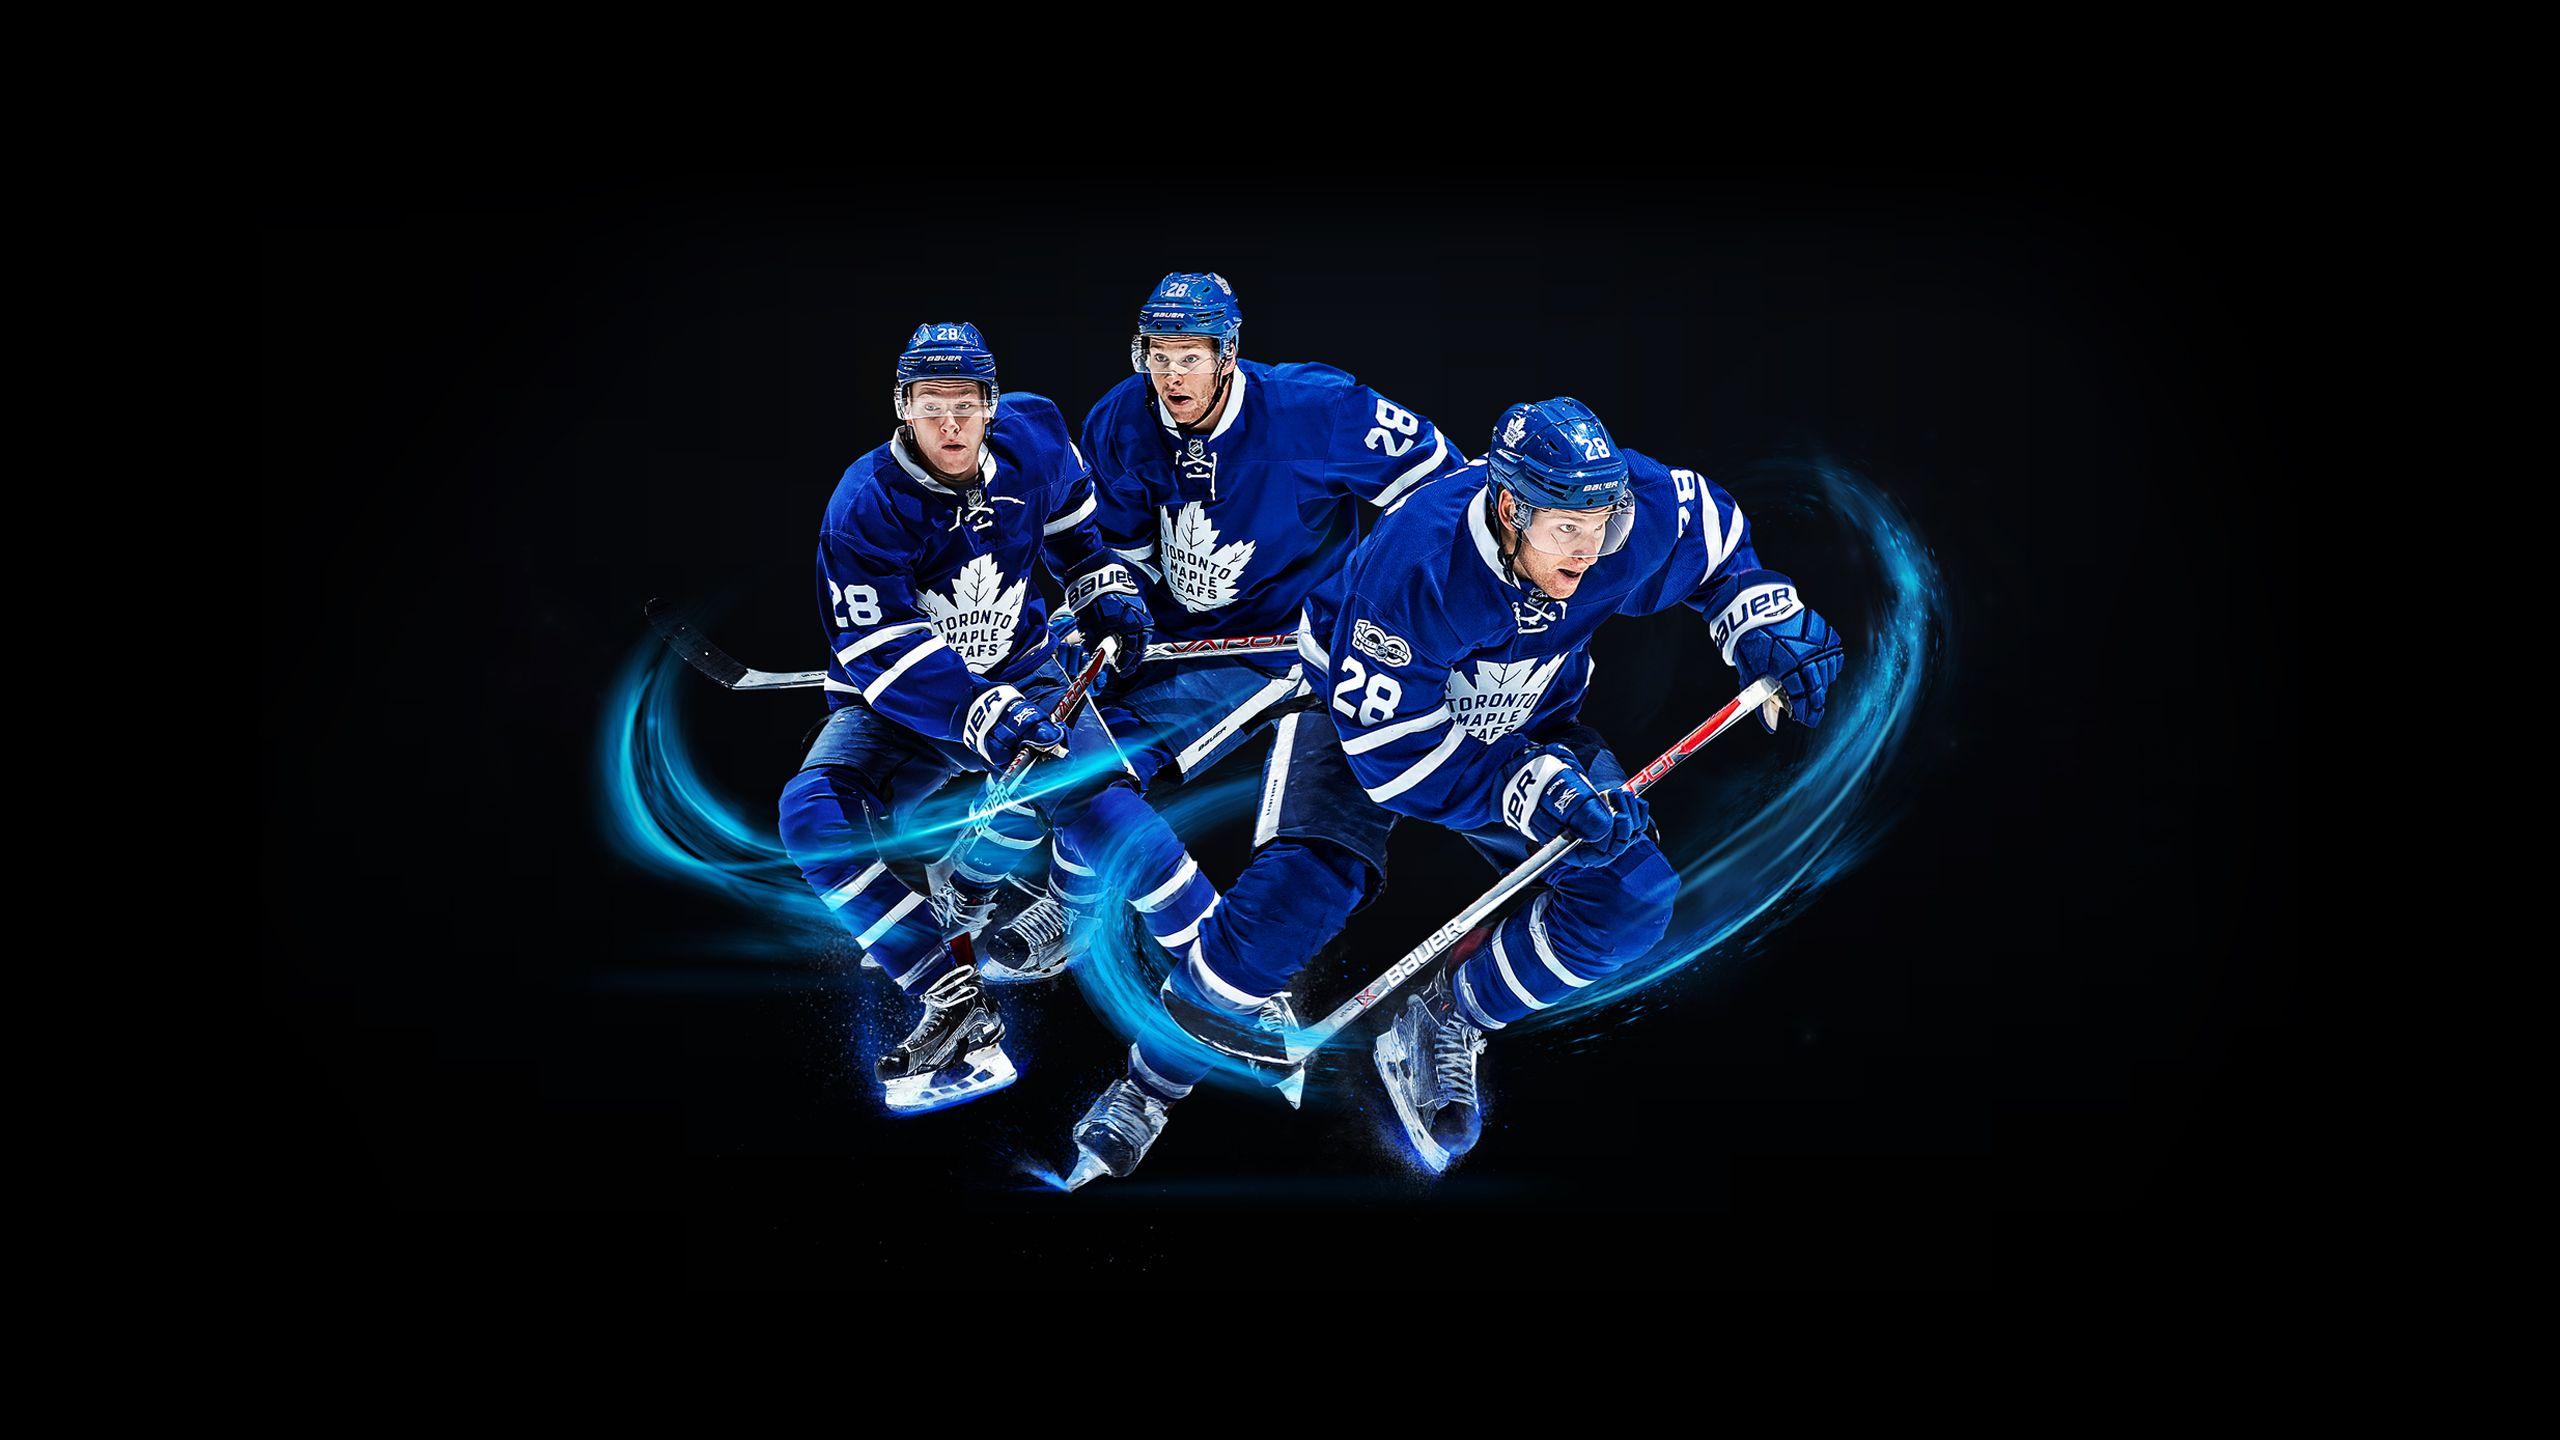 Toronto Maple Leafs 2018 Wallpapers - Wallpaper Cave